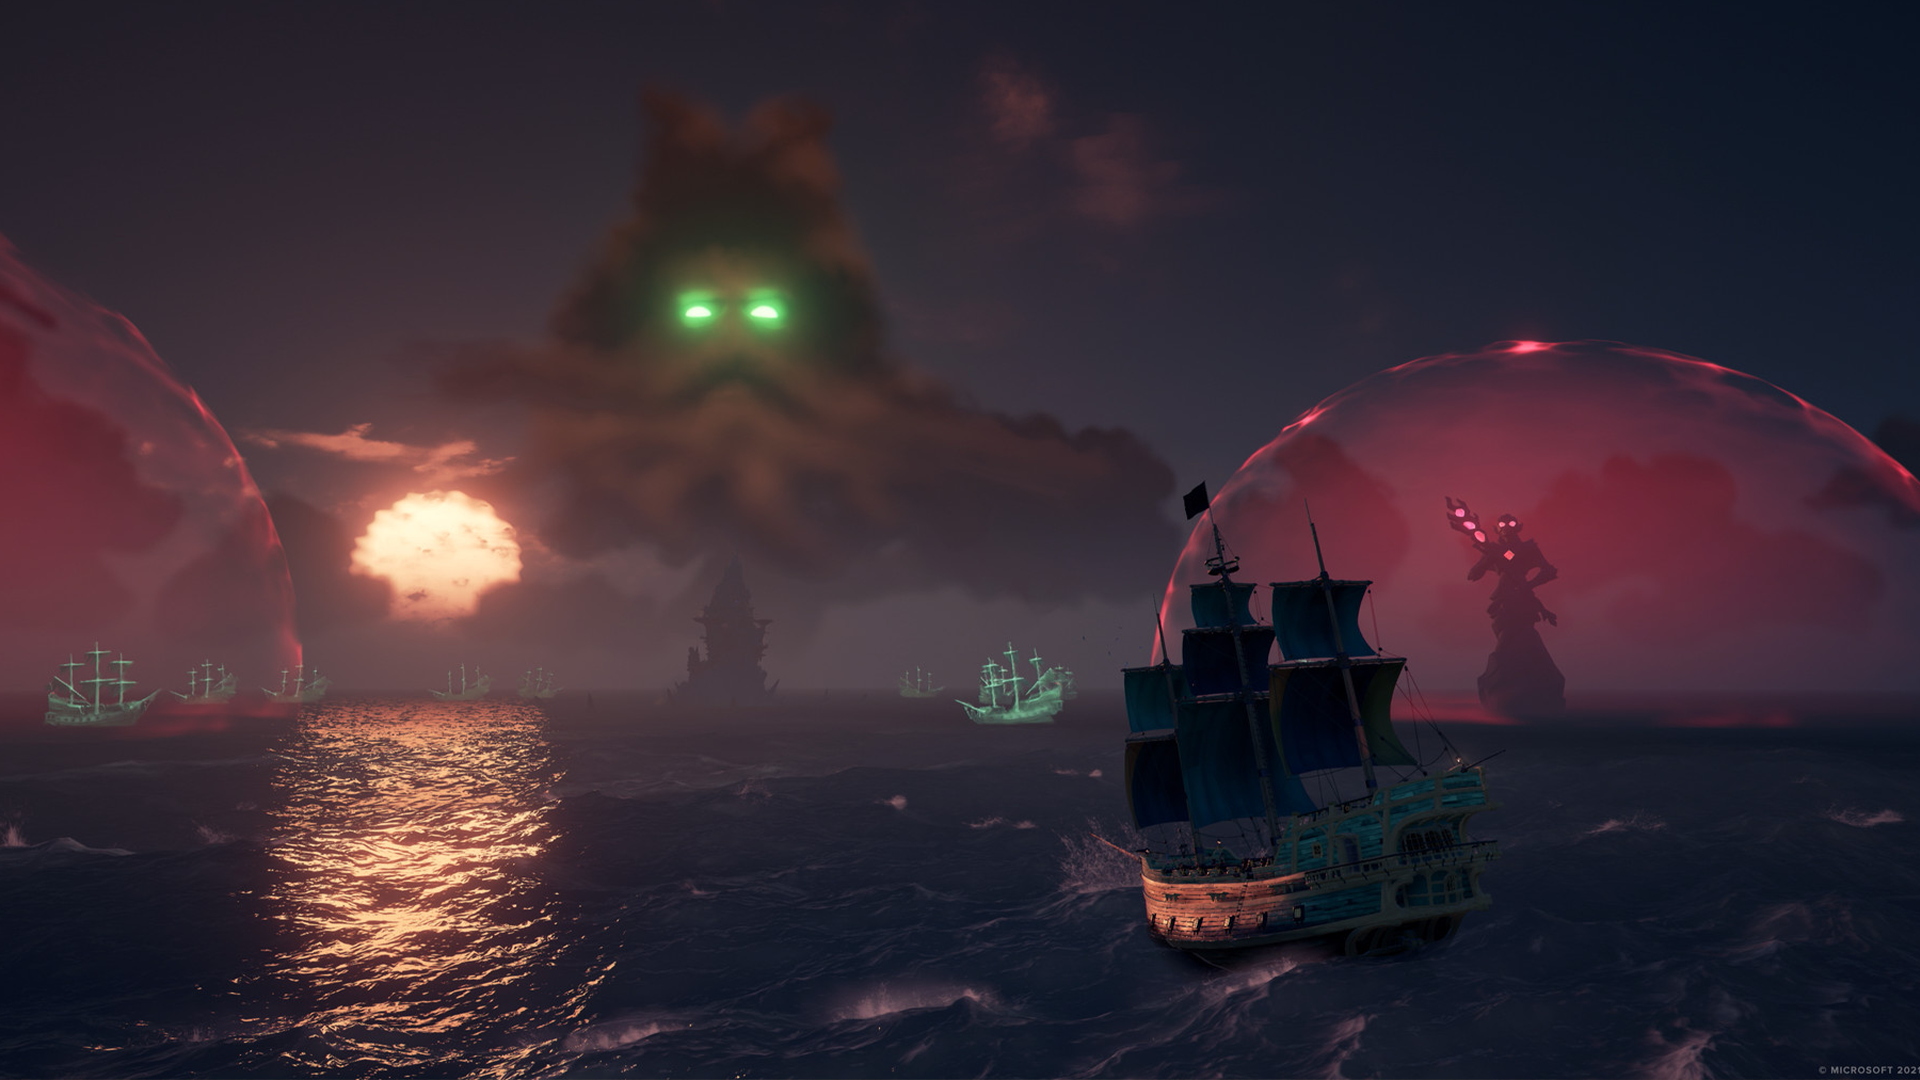 Sea of Thieves gameplay - Pirate ship in front of explosions